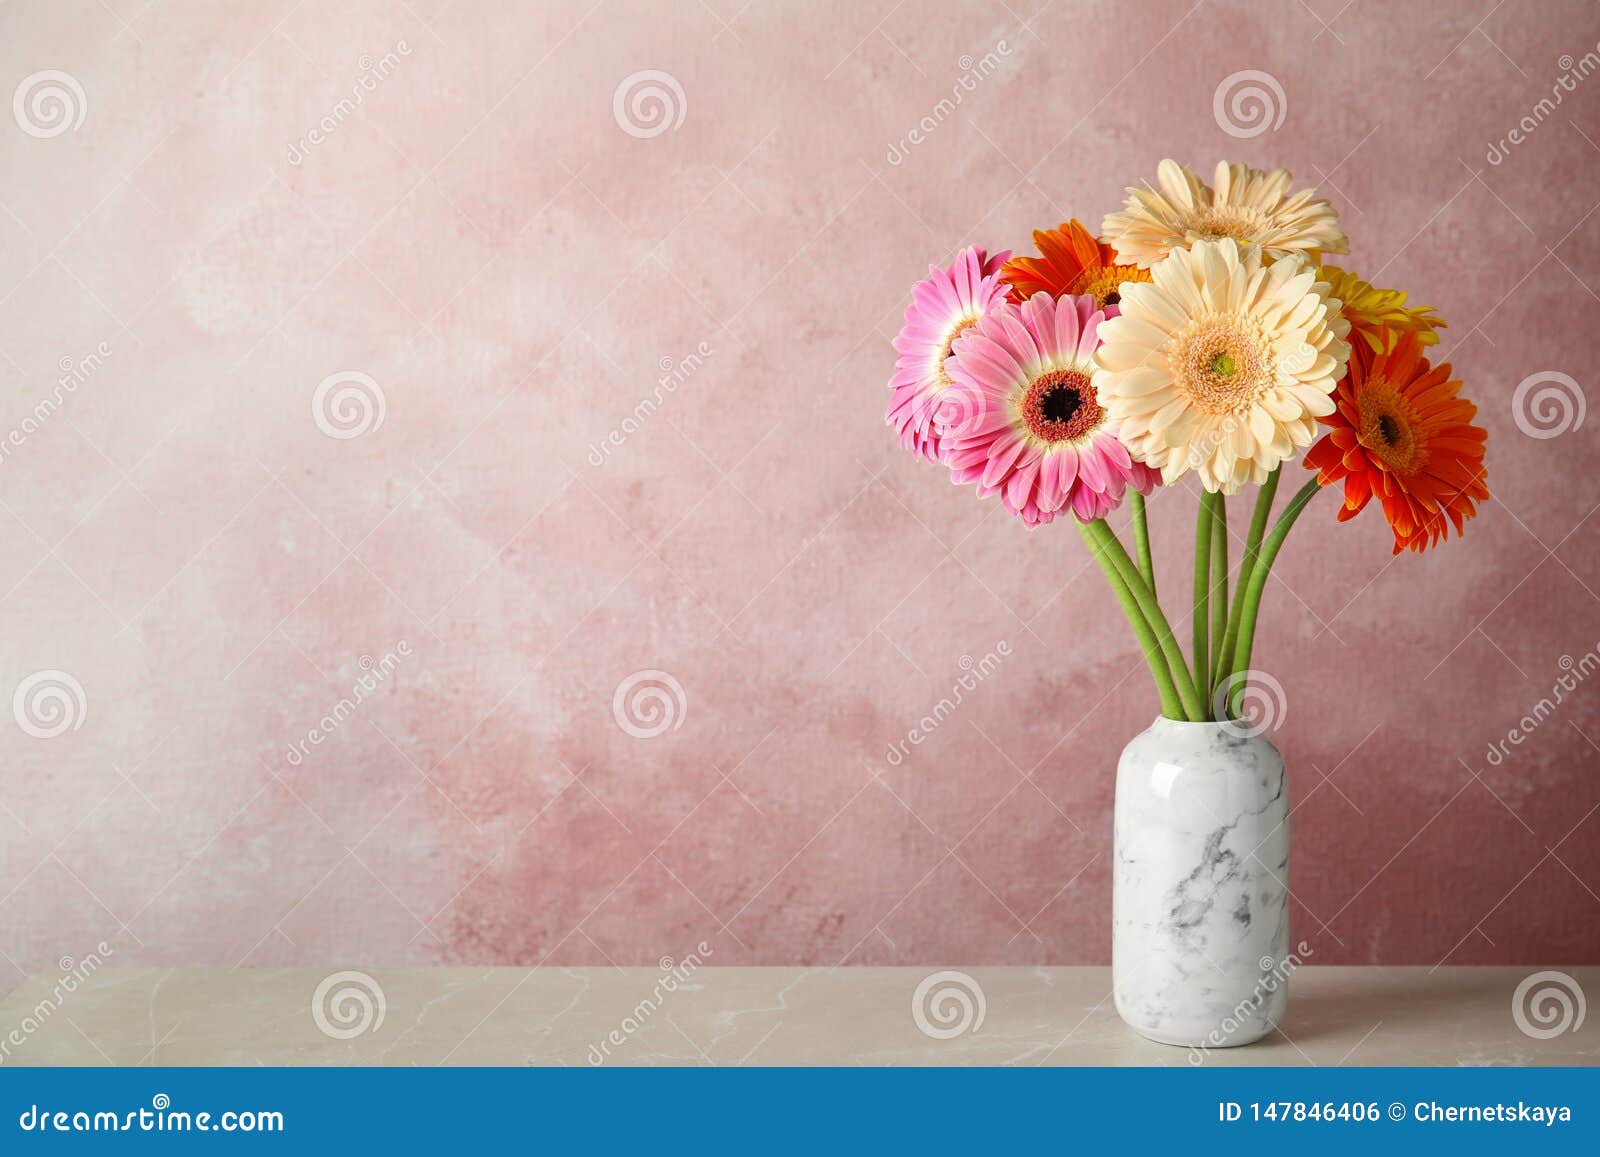 bouquet of beautiful bright gerbera flowers in vase on marble table against color background.